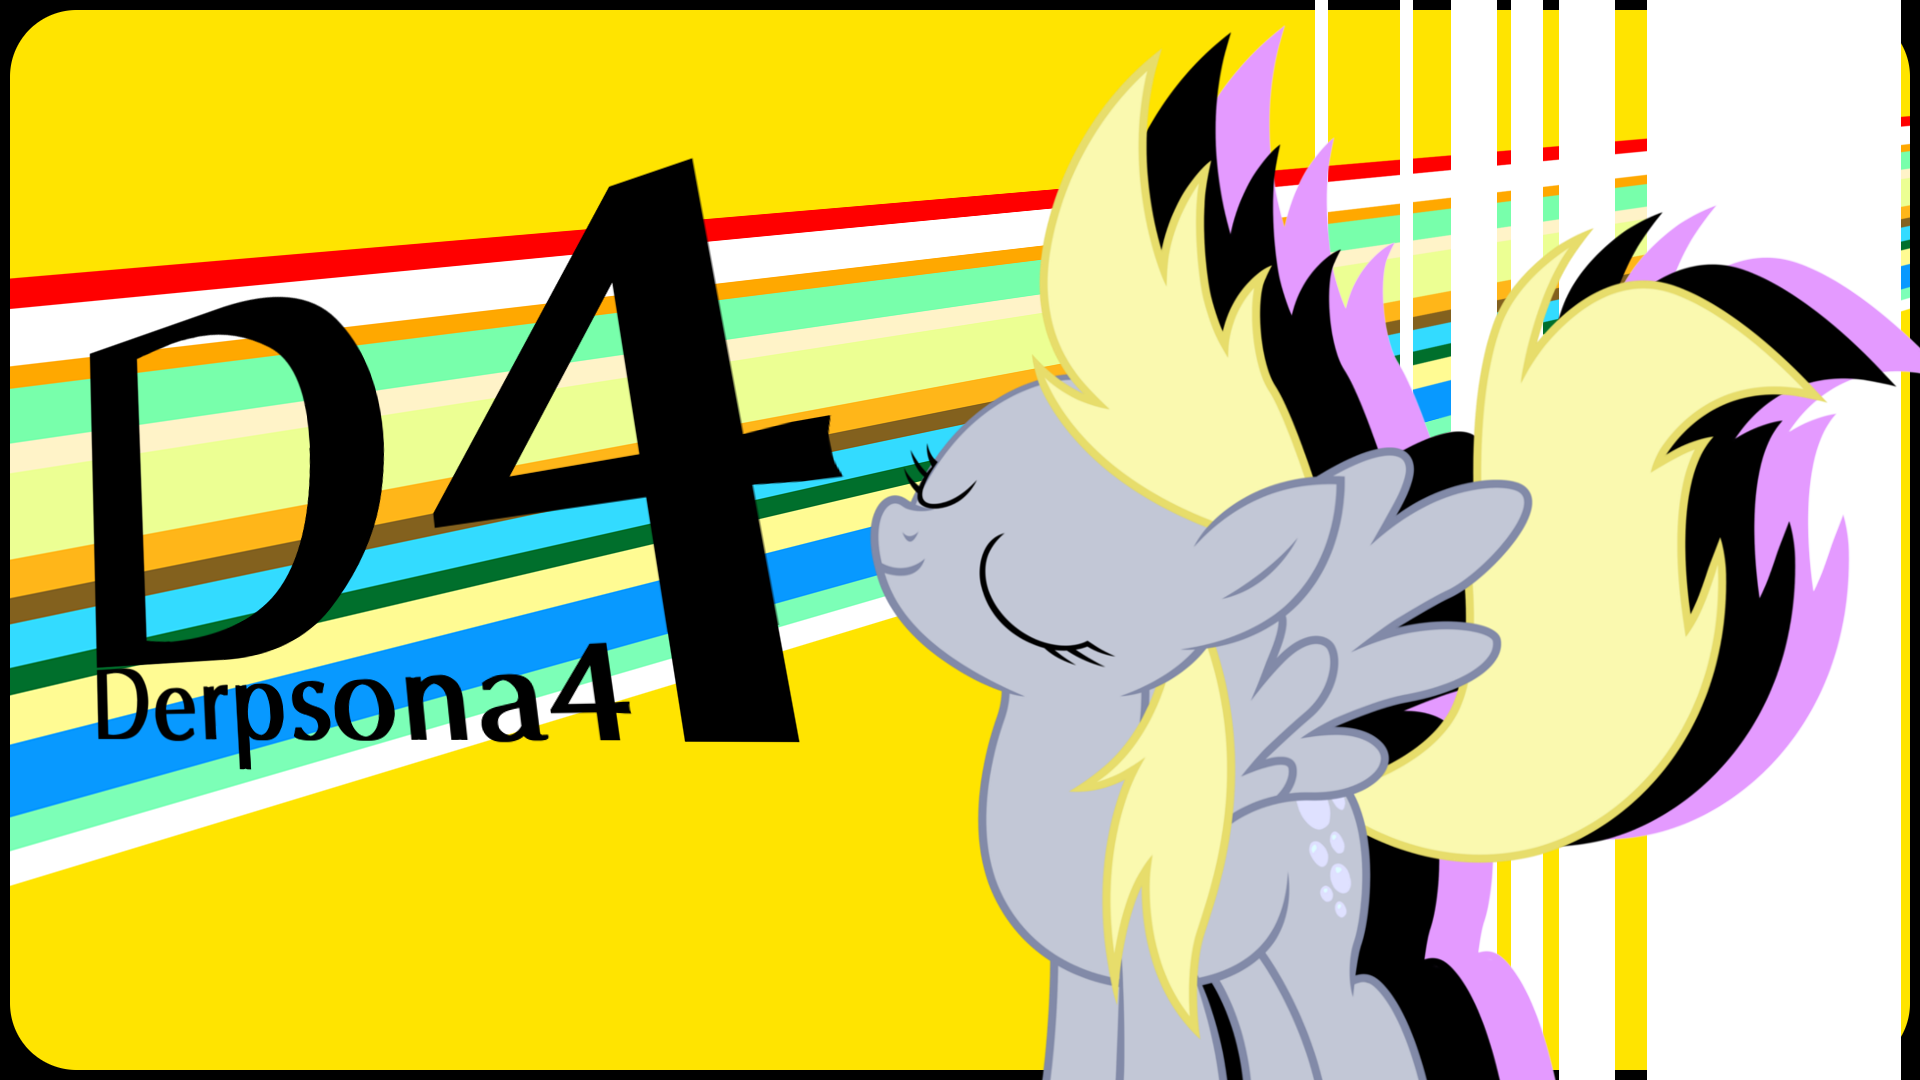 Derpsona4 by Clueless313 and Kooner-cz